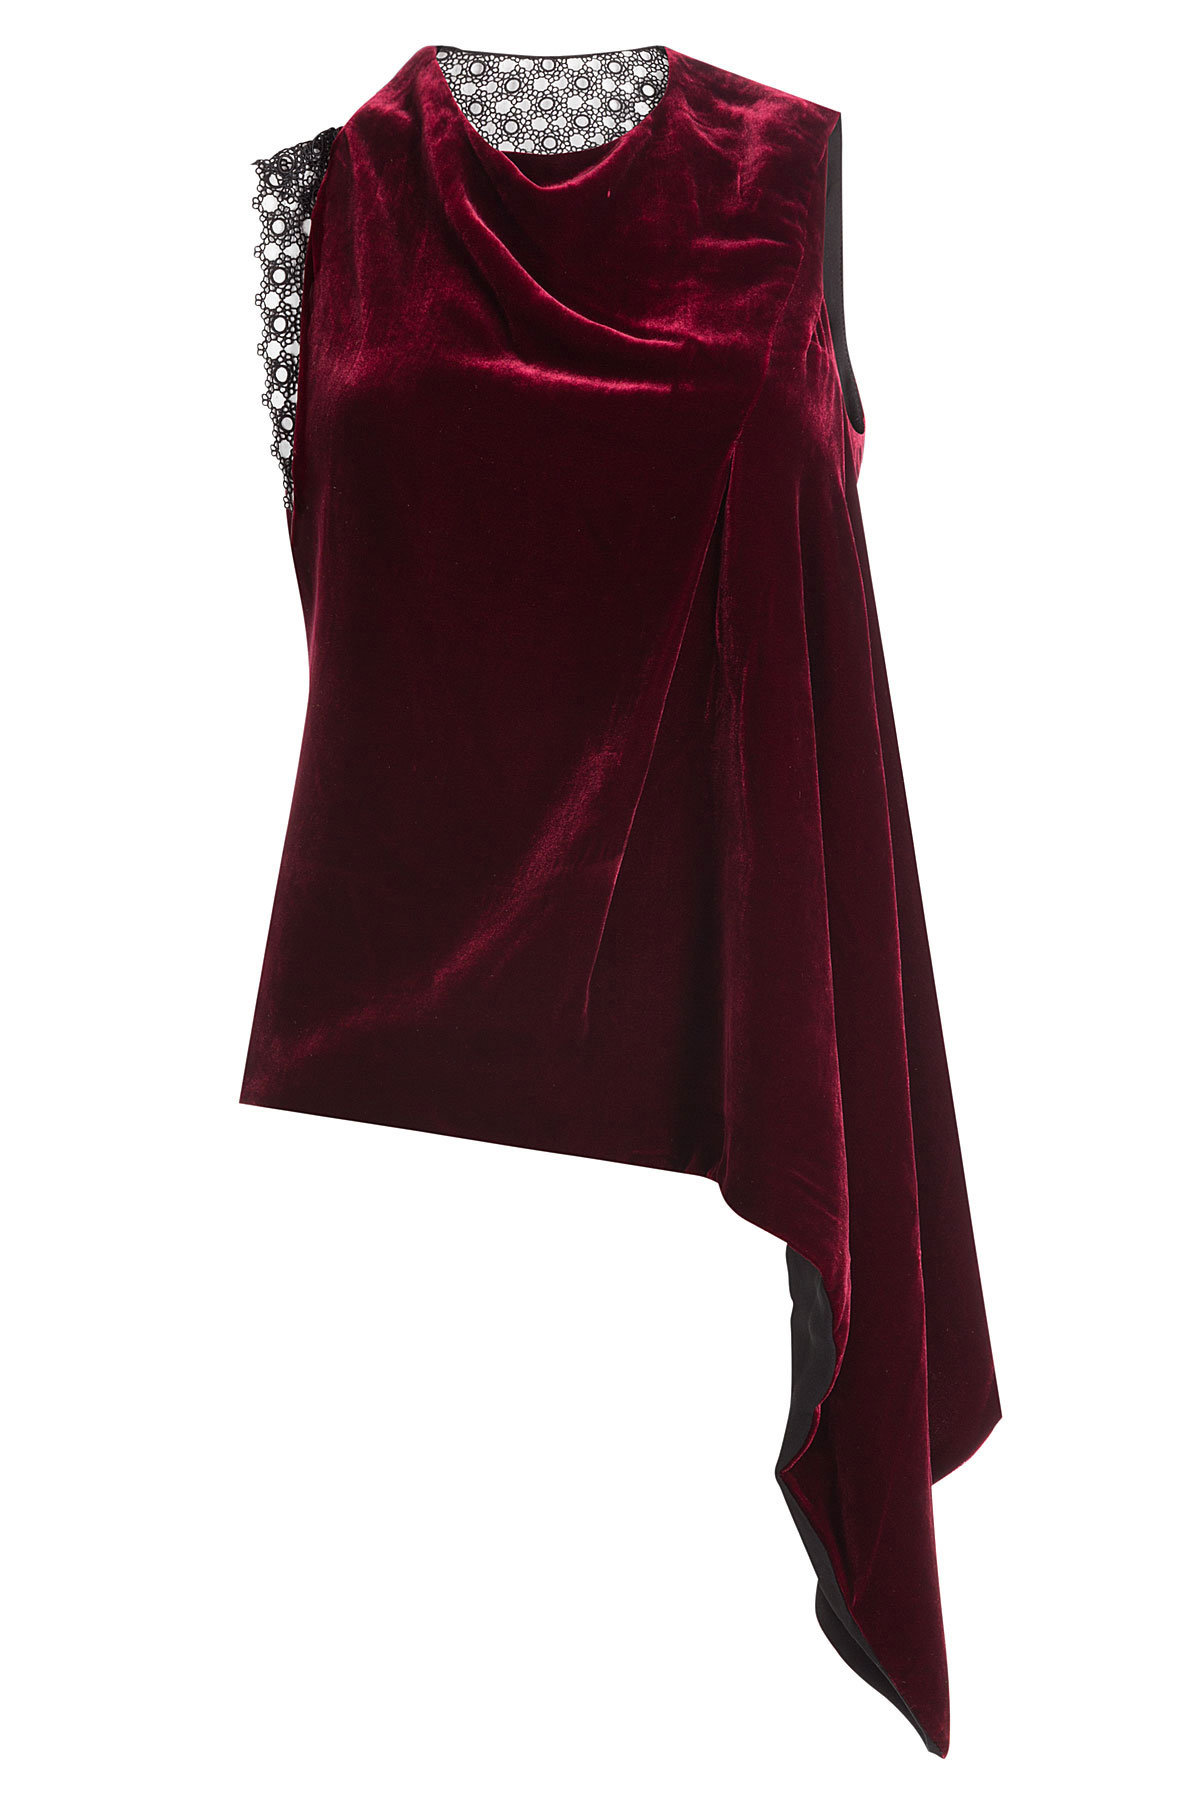 Roland Mouret - Velvet Top with Asymmetric Hemline and Lace